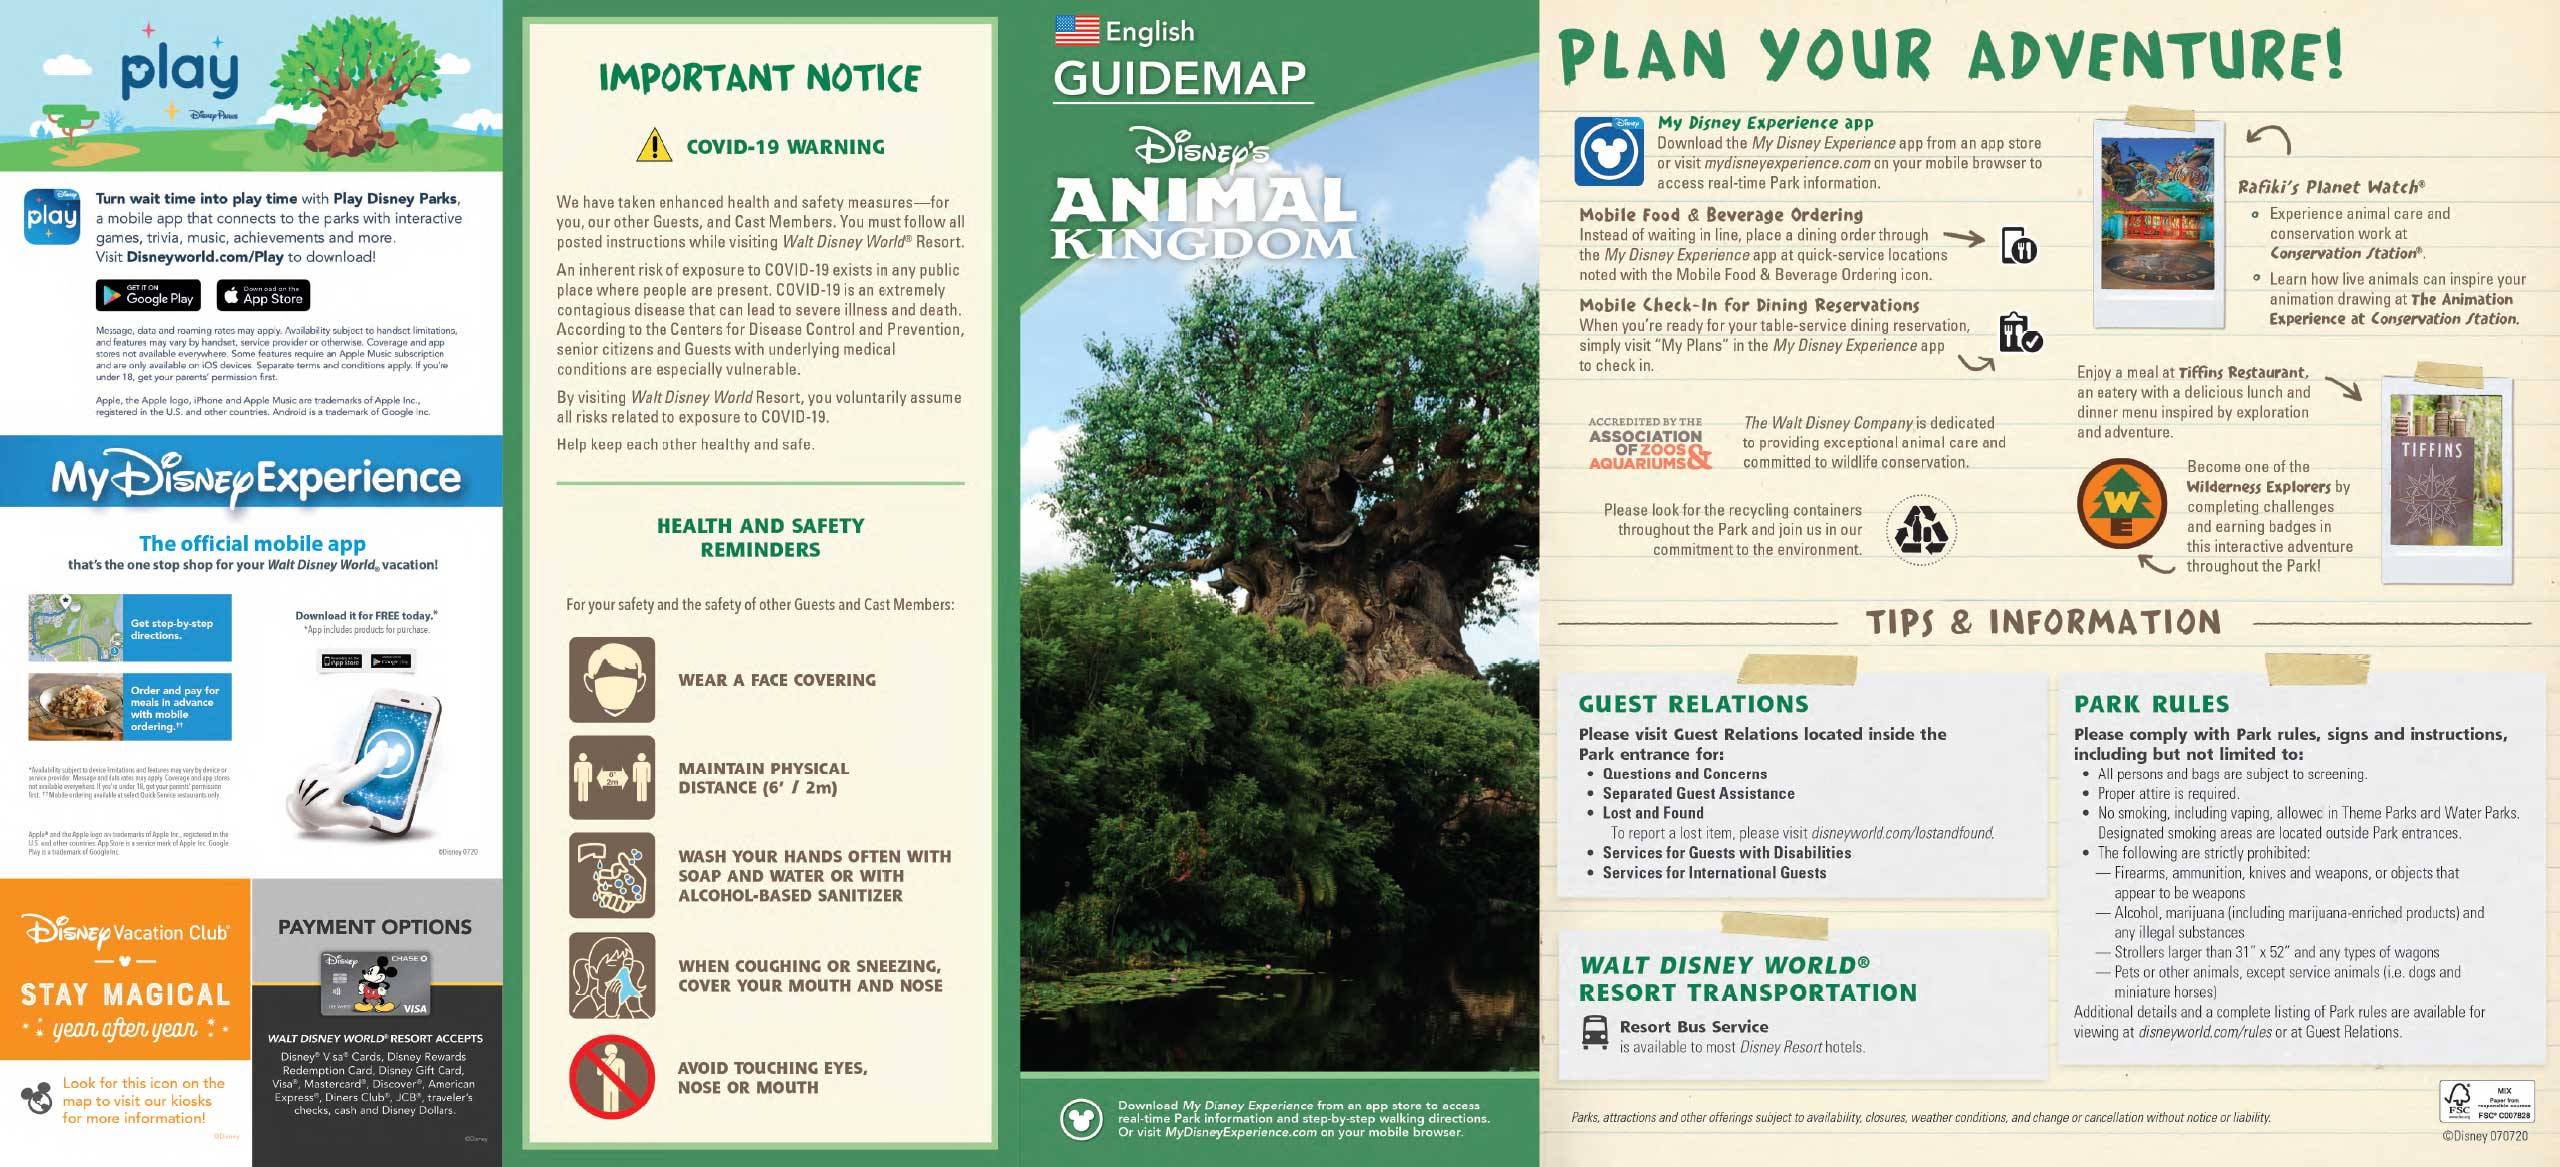 Disney's Animal Kingdom Guide Map July 2020 - Front